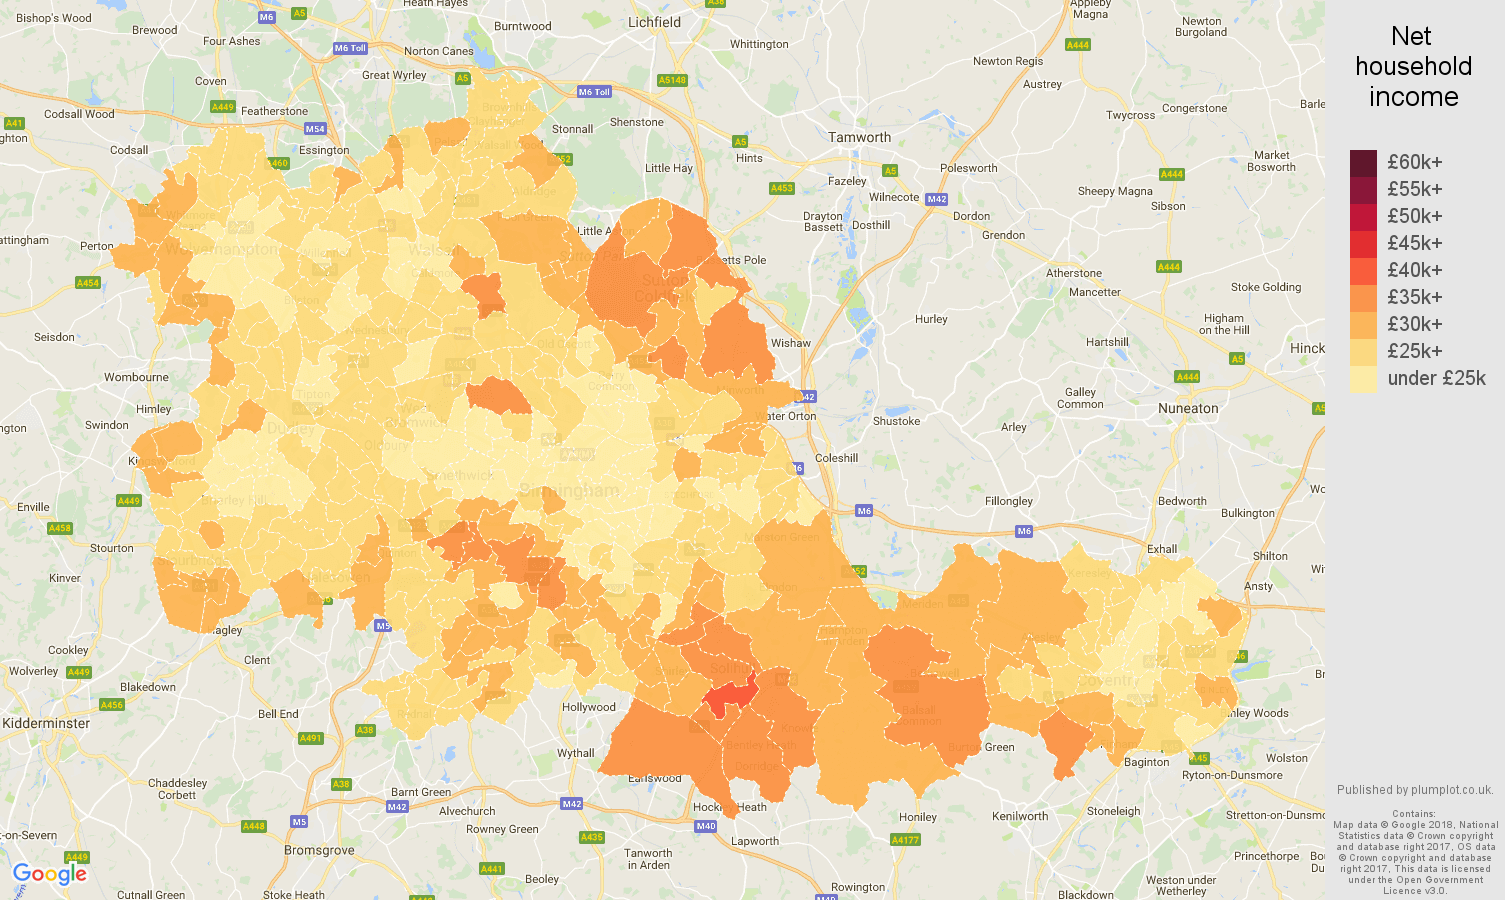 West Midlands county net household income map